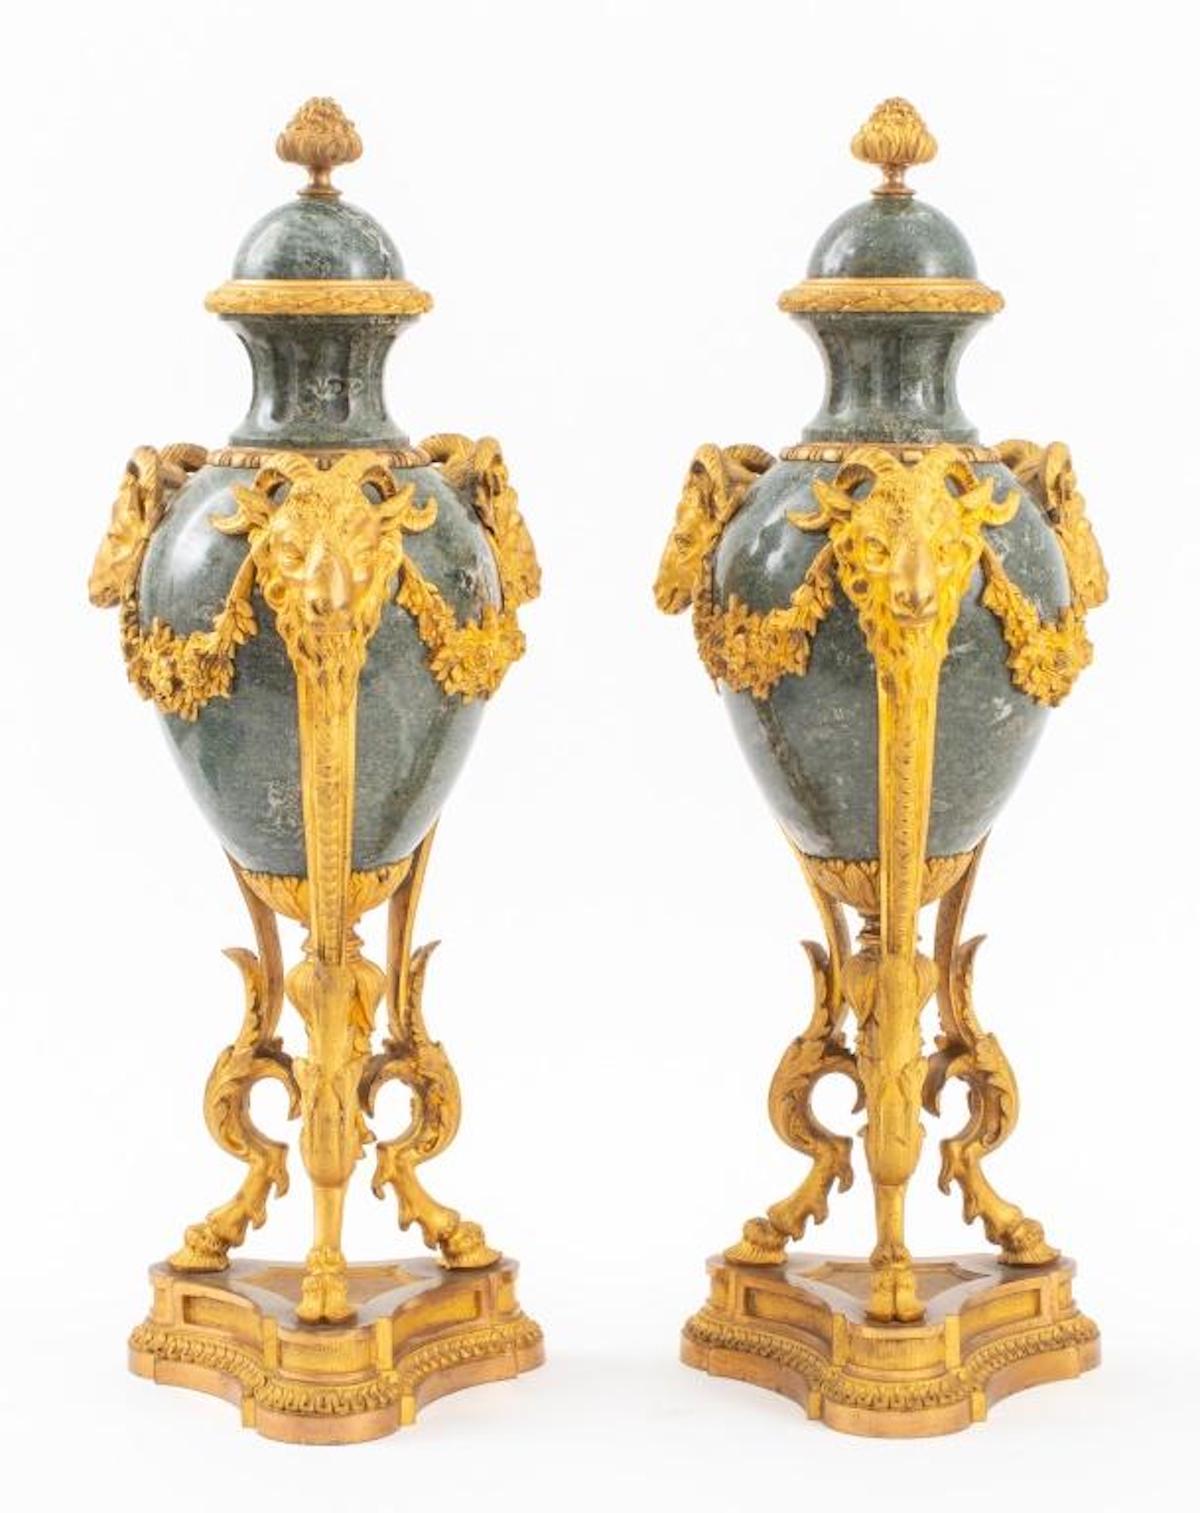 Large pair of baluster form gilt bronze-mounted marble decorative garnitures / urns, in the manner of Pierre Gouthiere (French, 1732-1813). Each footed urn / garniture features a fruiting finials above verde antico marble caps, fluted necks with